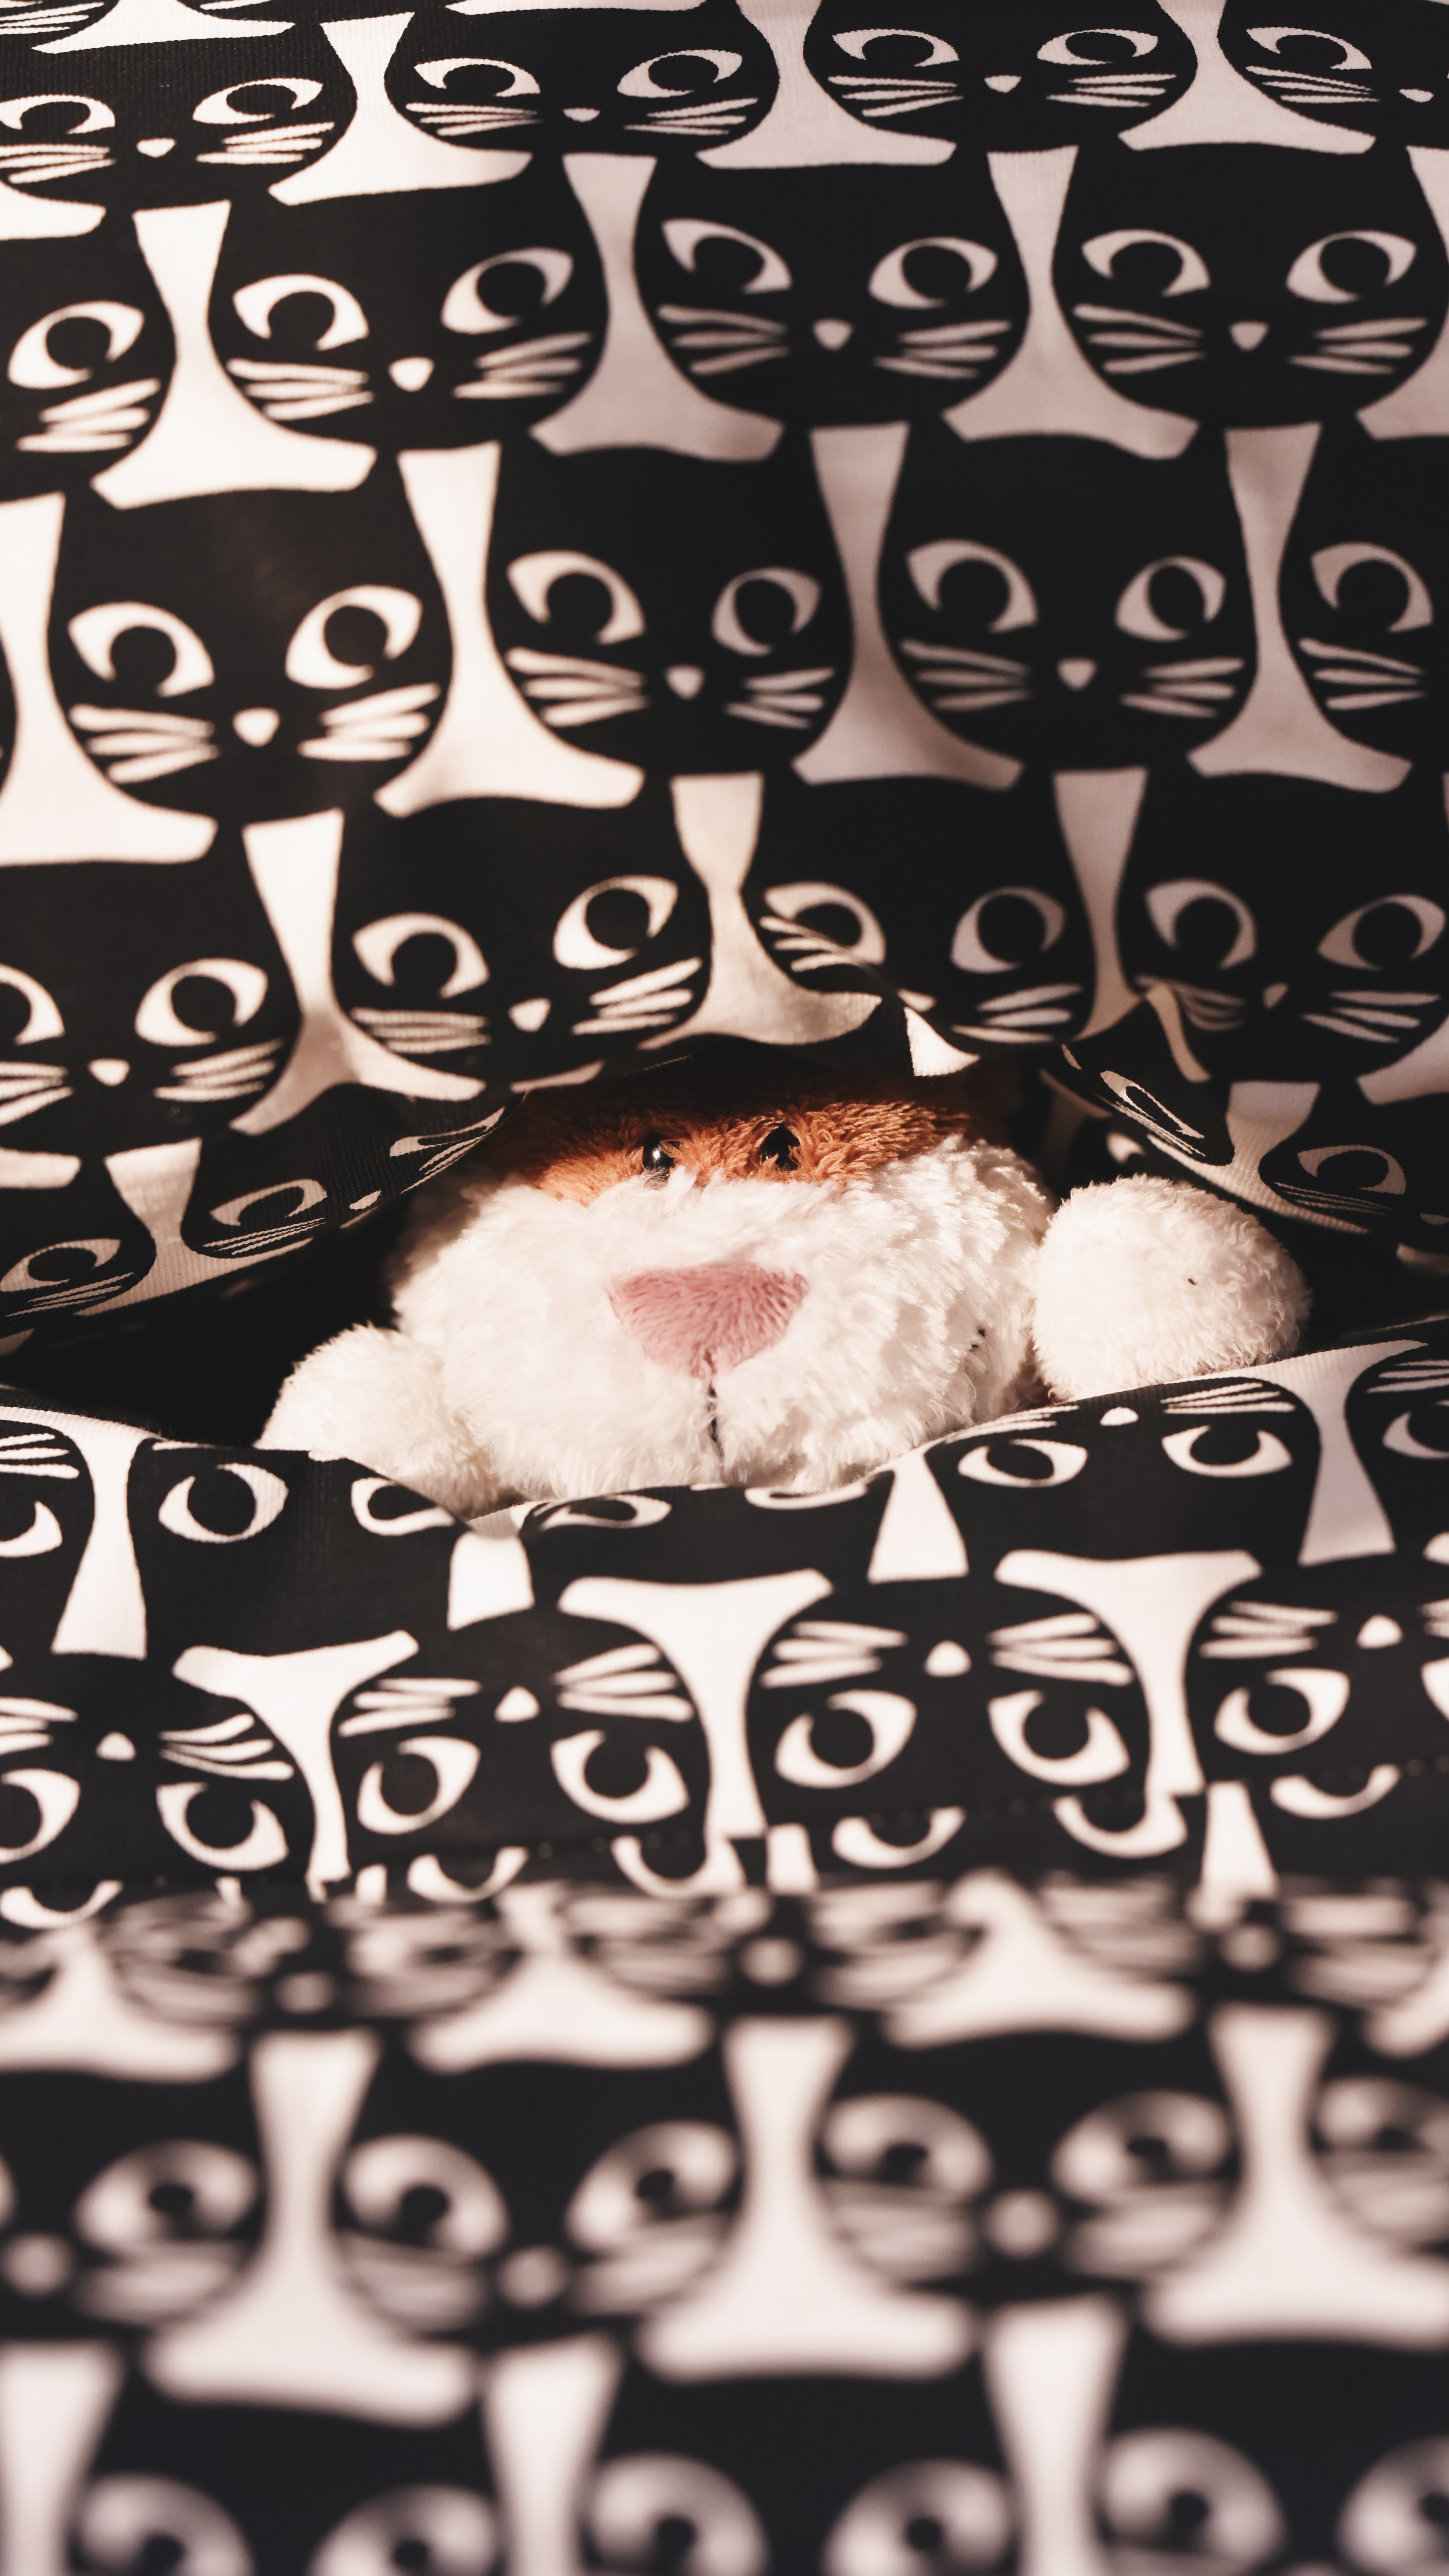 cats, miscellanea, miscellaneous, pattern, plush, toy, peek out, look out Free Stock Photo